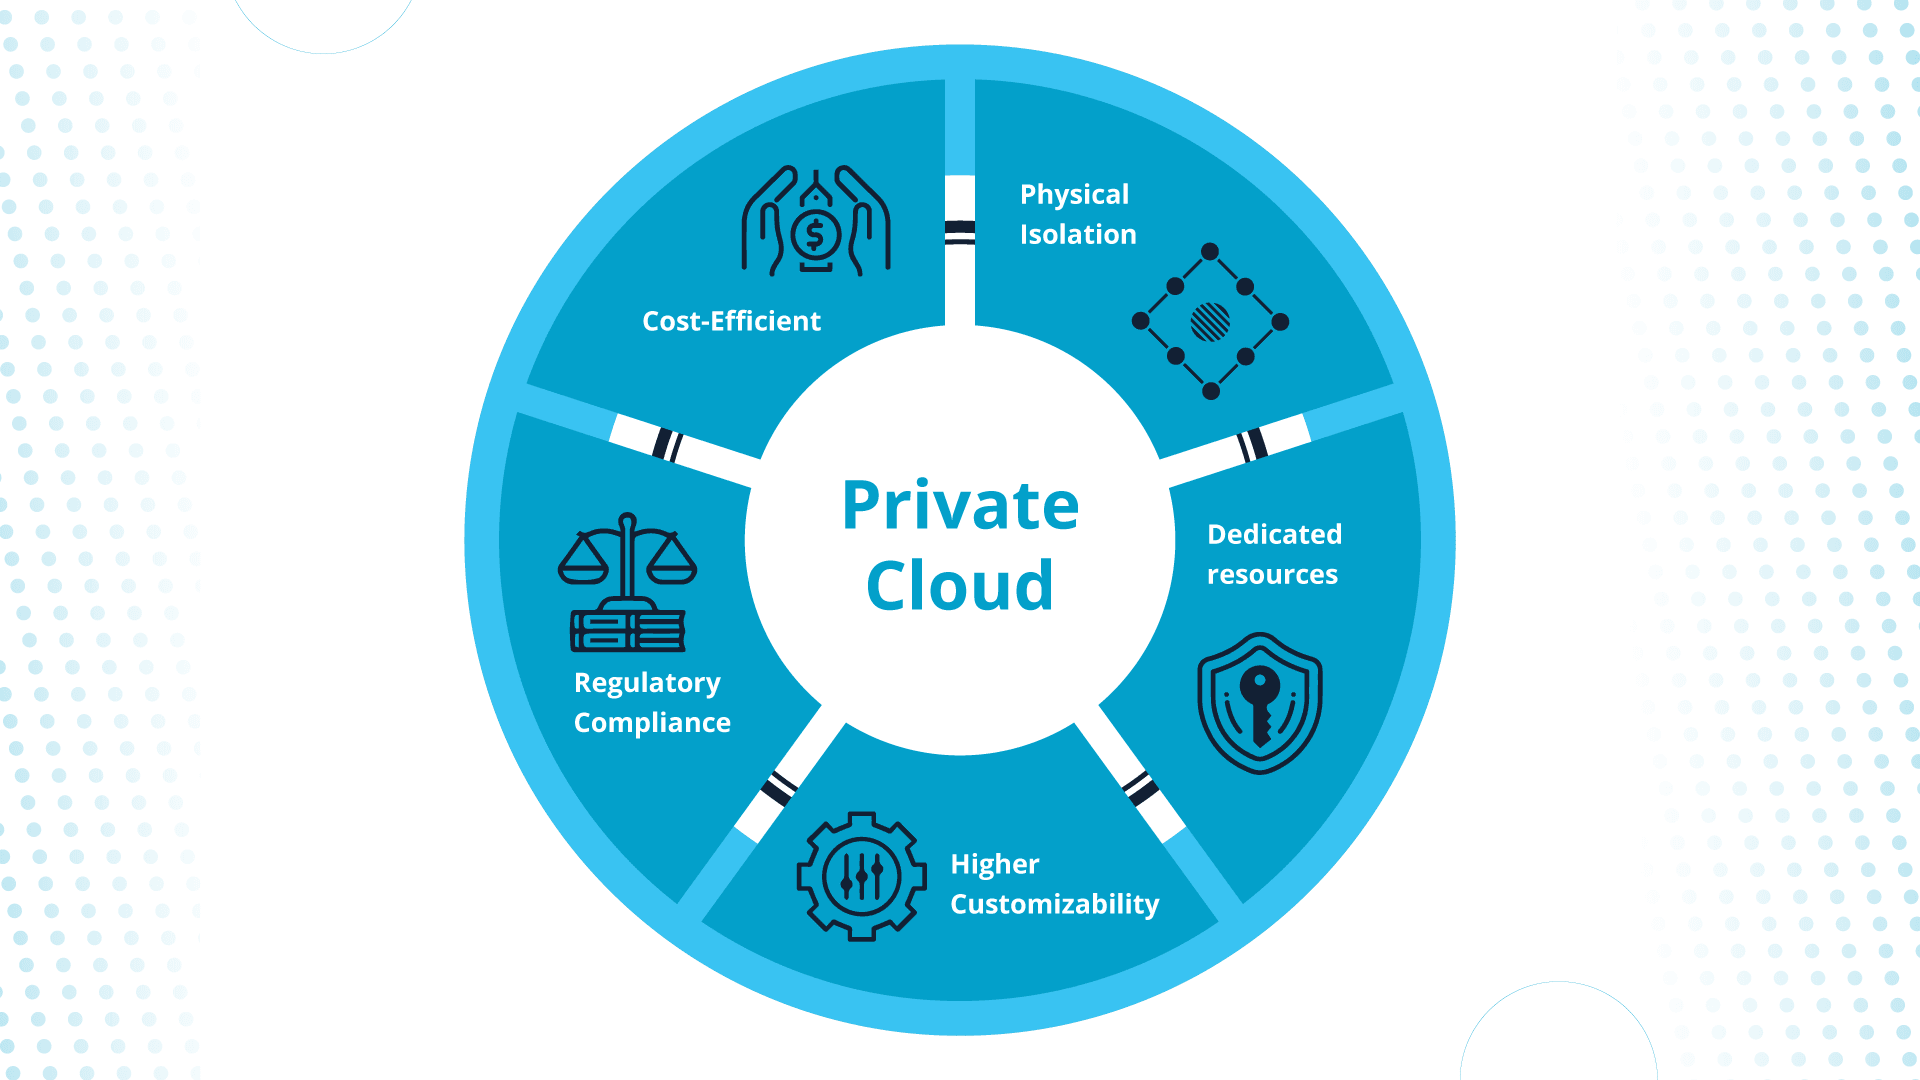 Private cloud offers lots of benefits, including regulatory compliance and physical isolation. 